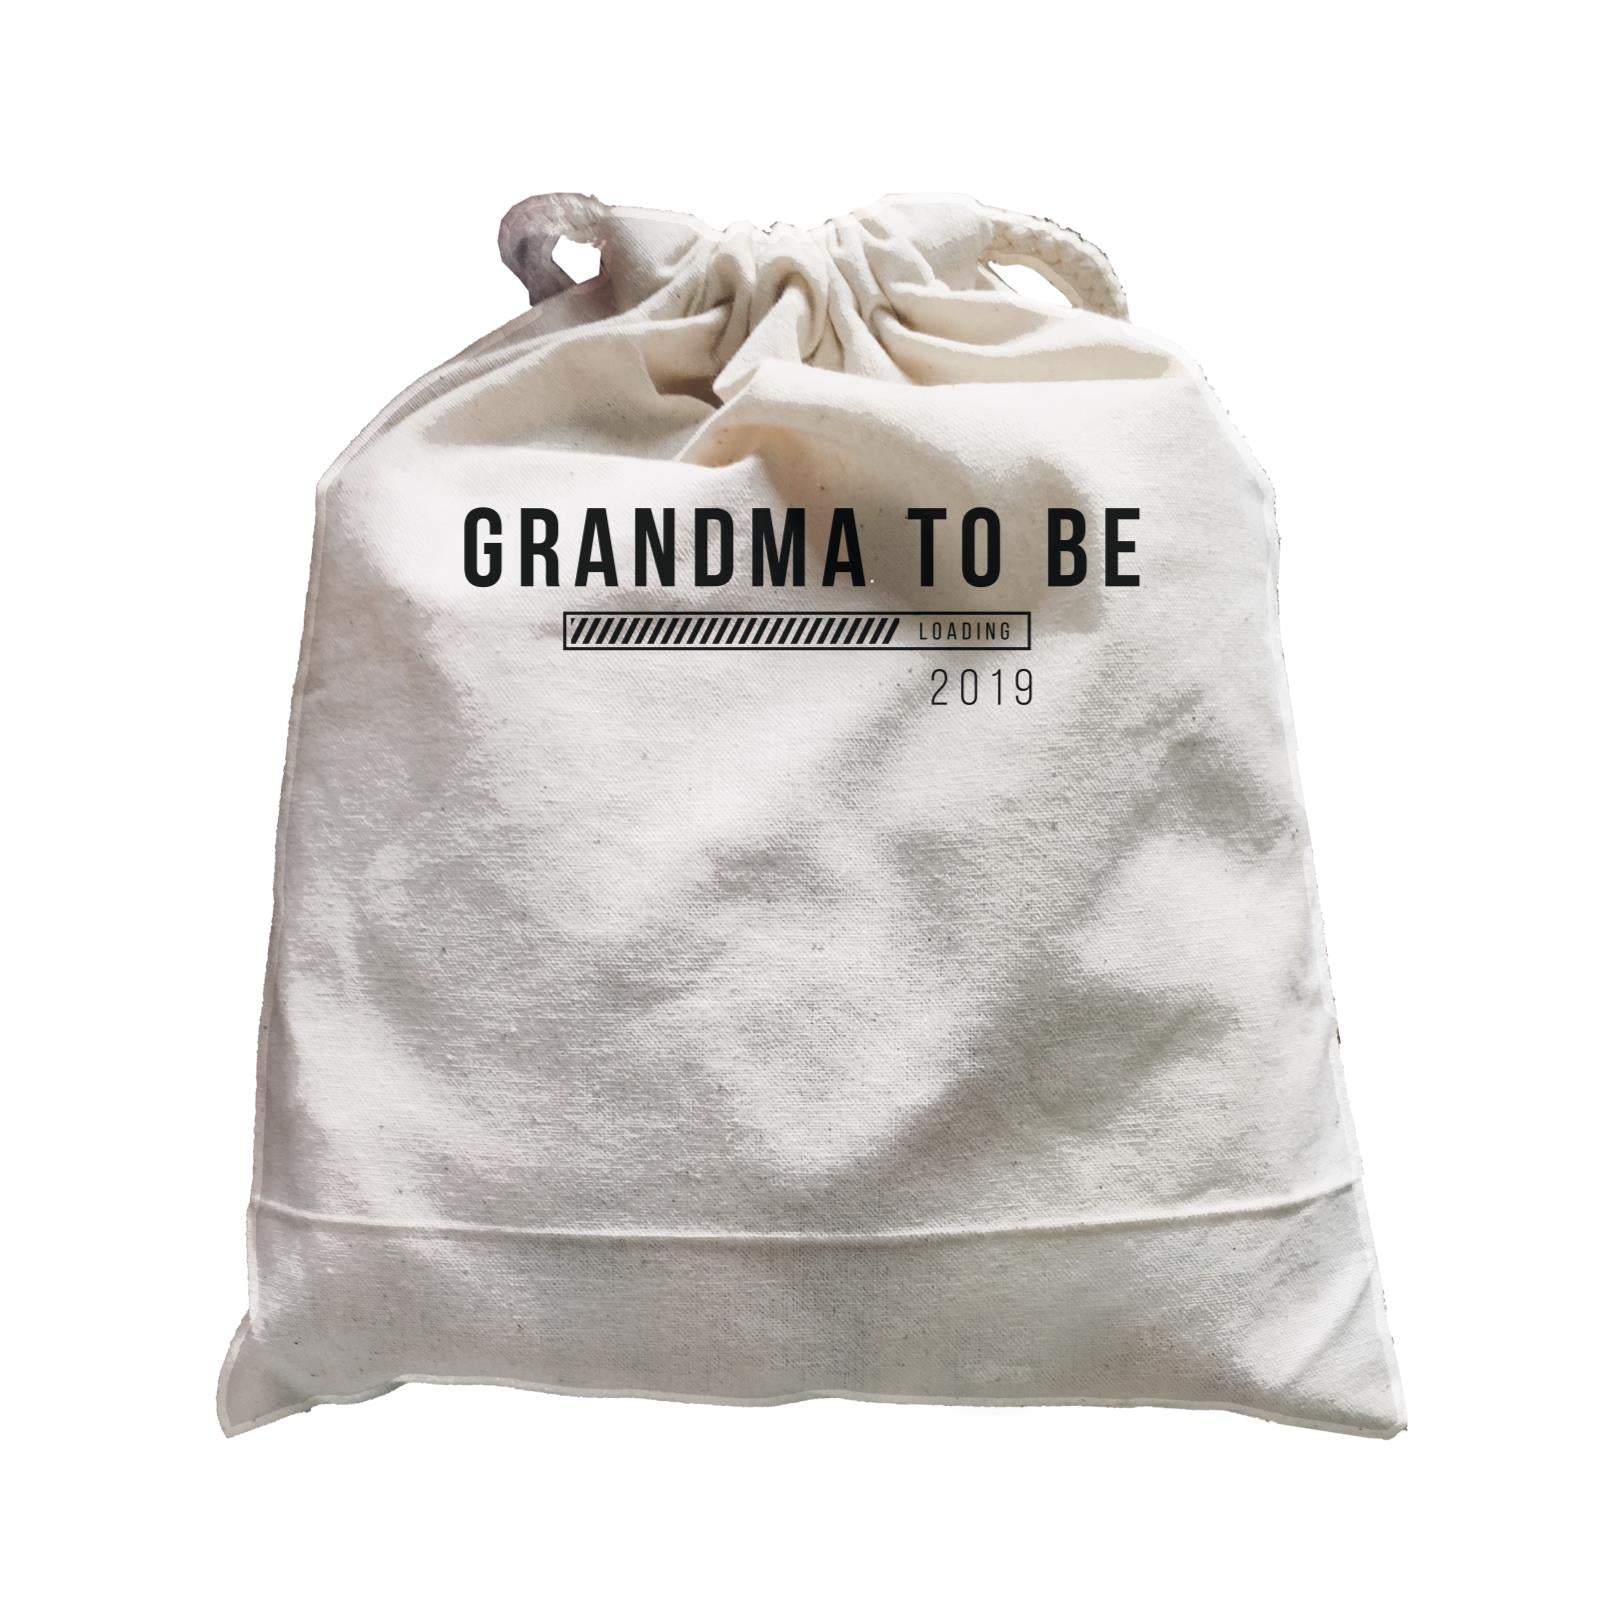 Coming Soon Family Grandma To Be Loading Add Date Satchel